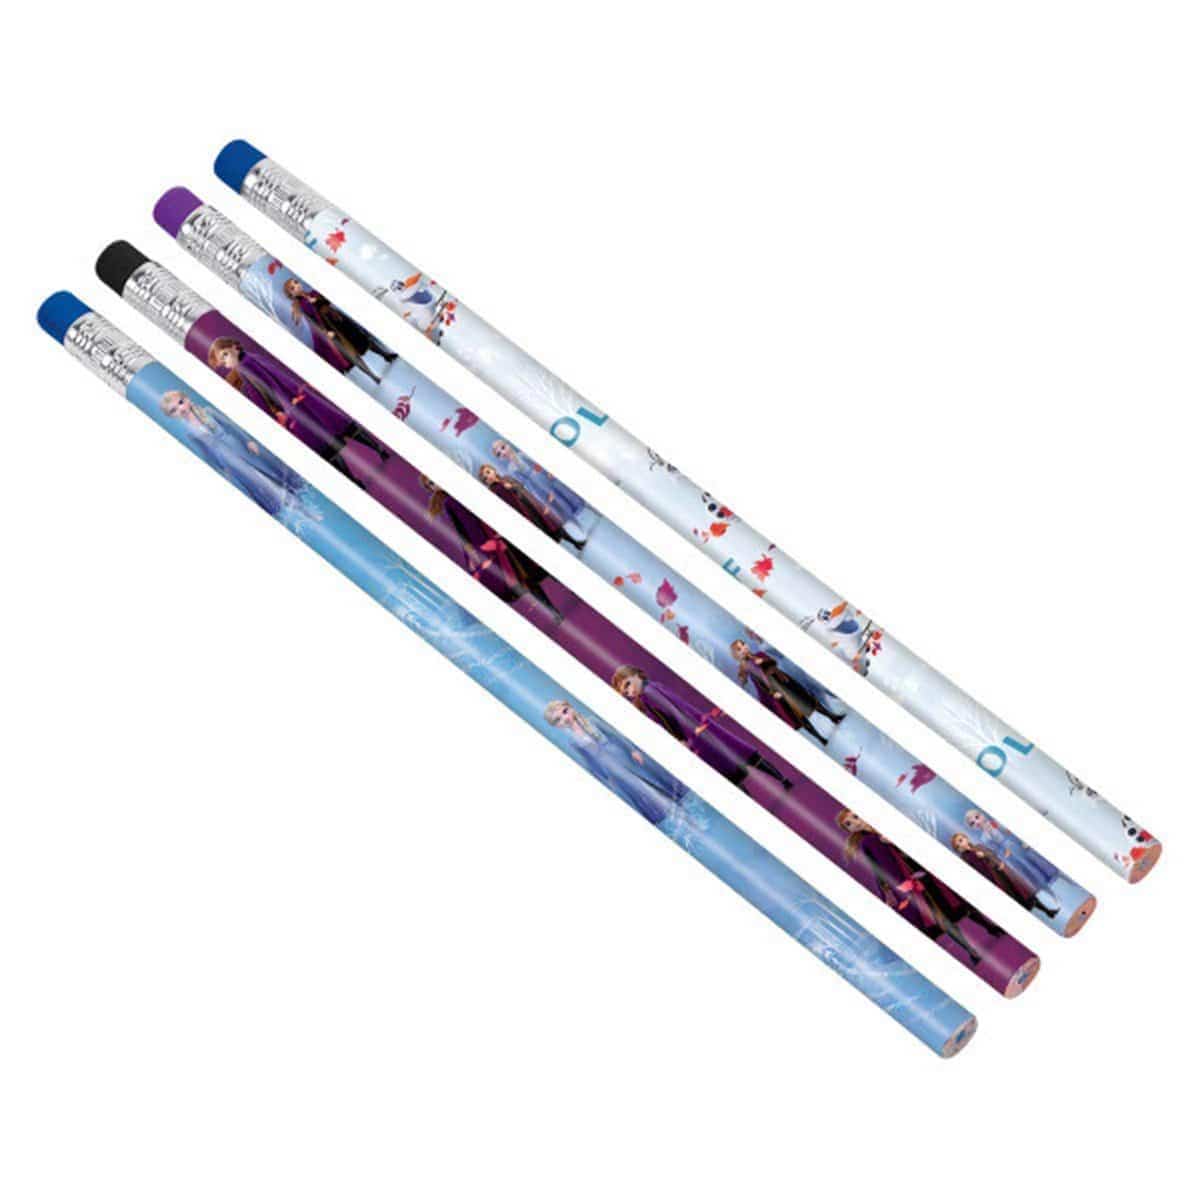 Buy Kids Birthday Frozen 2 pencils, 8 per package sold at Party Expert